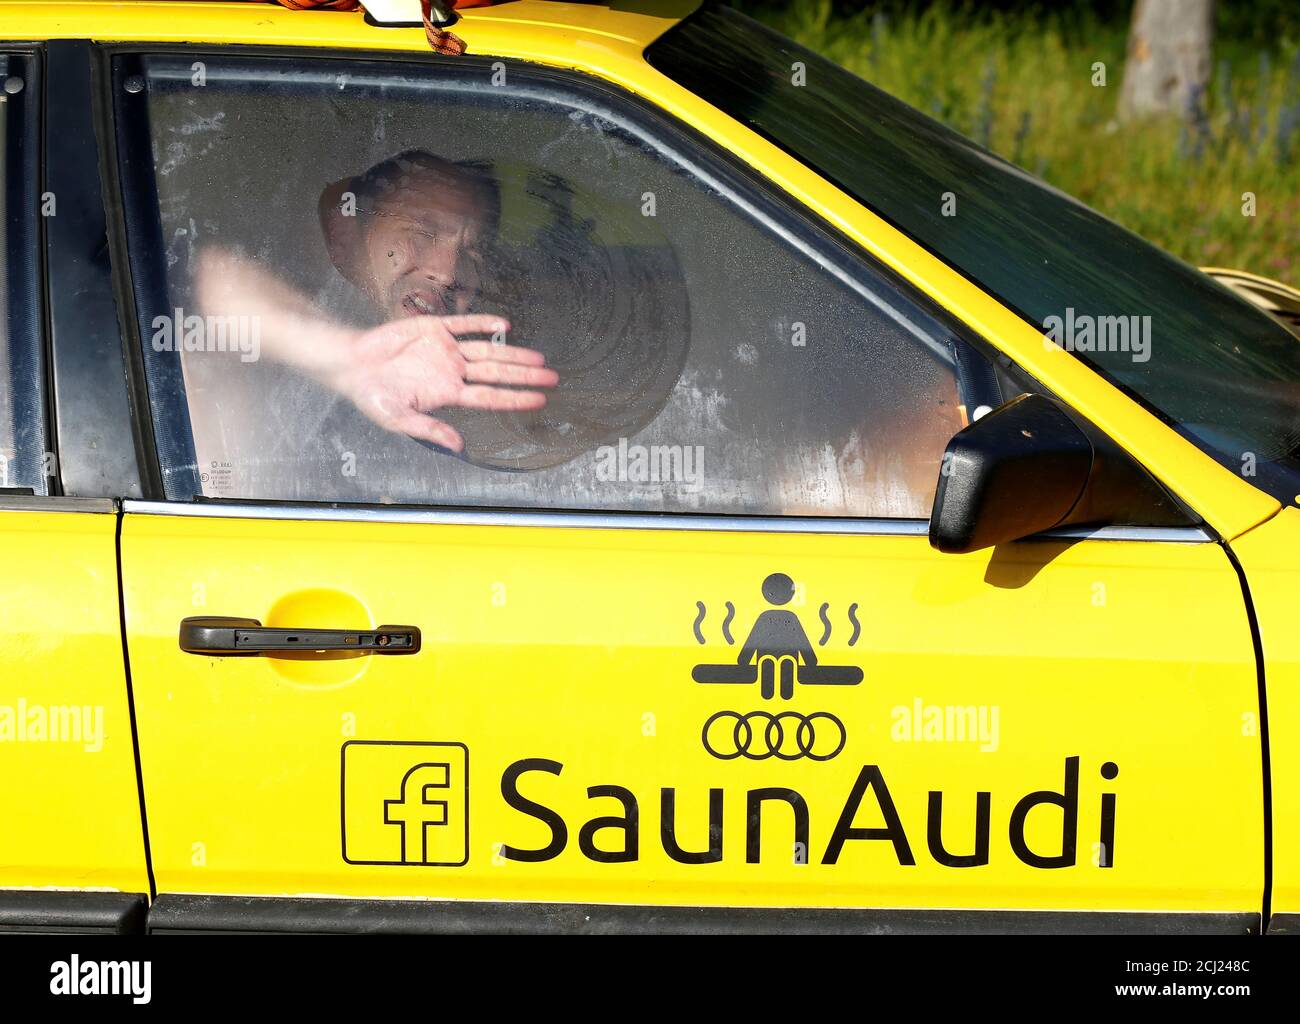 Tauri Liiv cleans a window as he enjoys bathing in an old yellow Audi car  converted